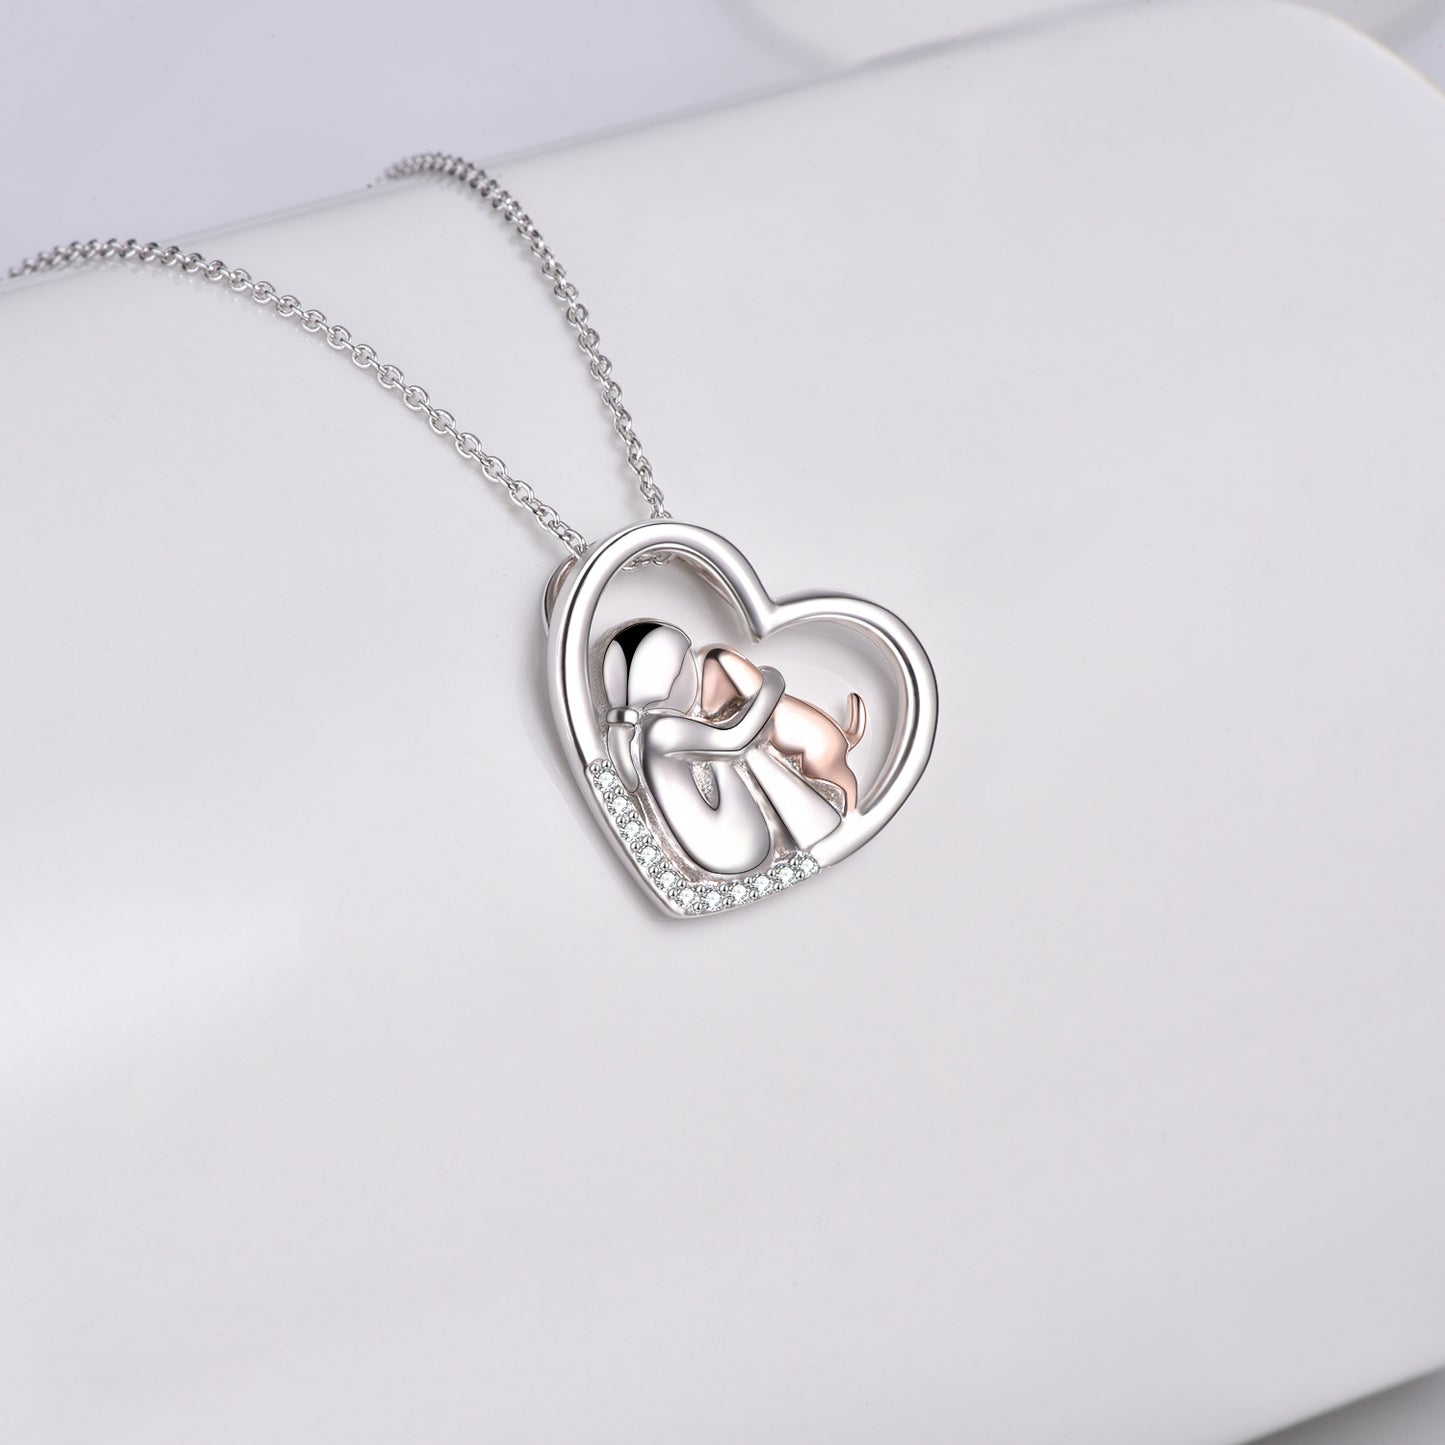 Rose Gold Dog Necklace for Girl Women Sterling Silver Girls Embraced Dog Pet Pendant Jewelry